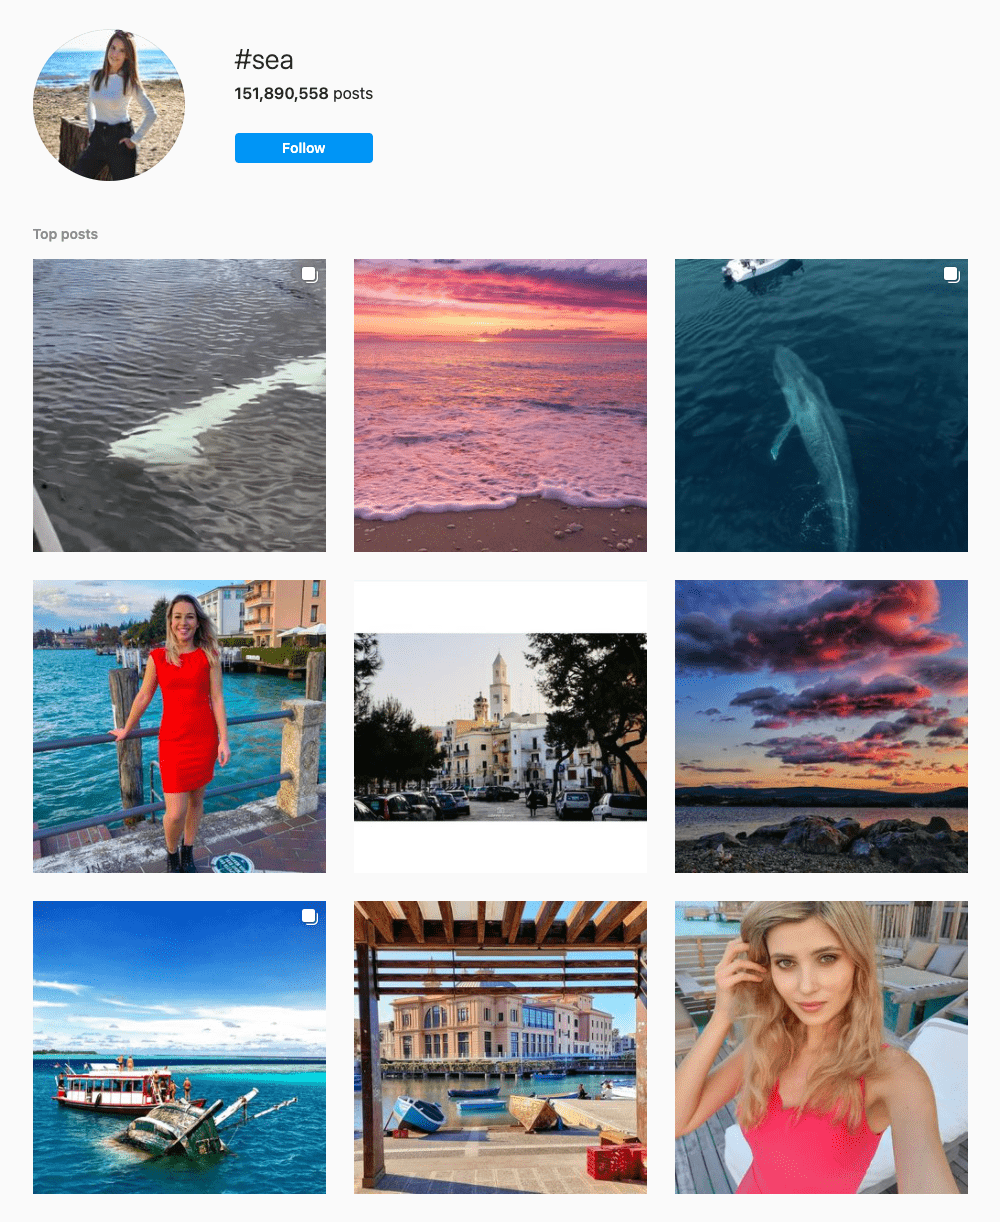 #sea Hashtags for Instagram